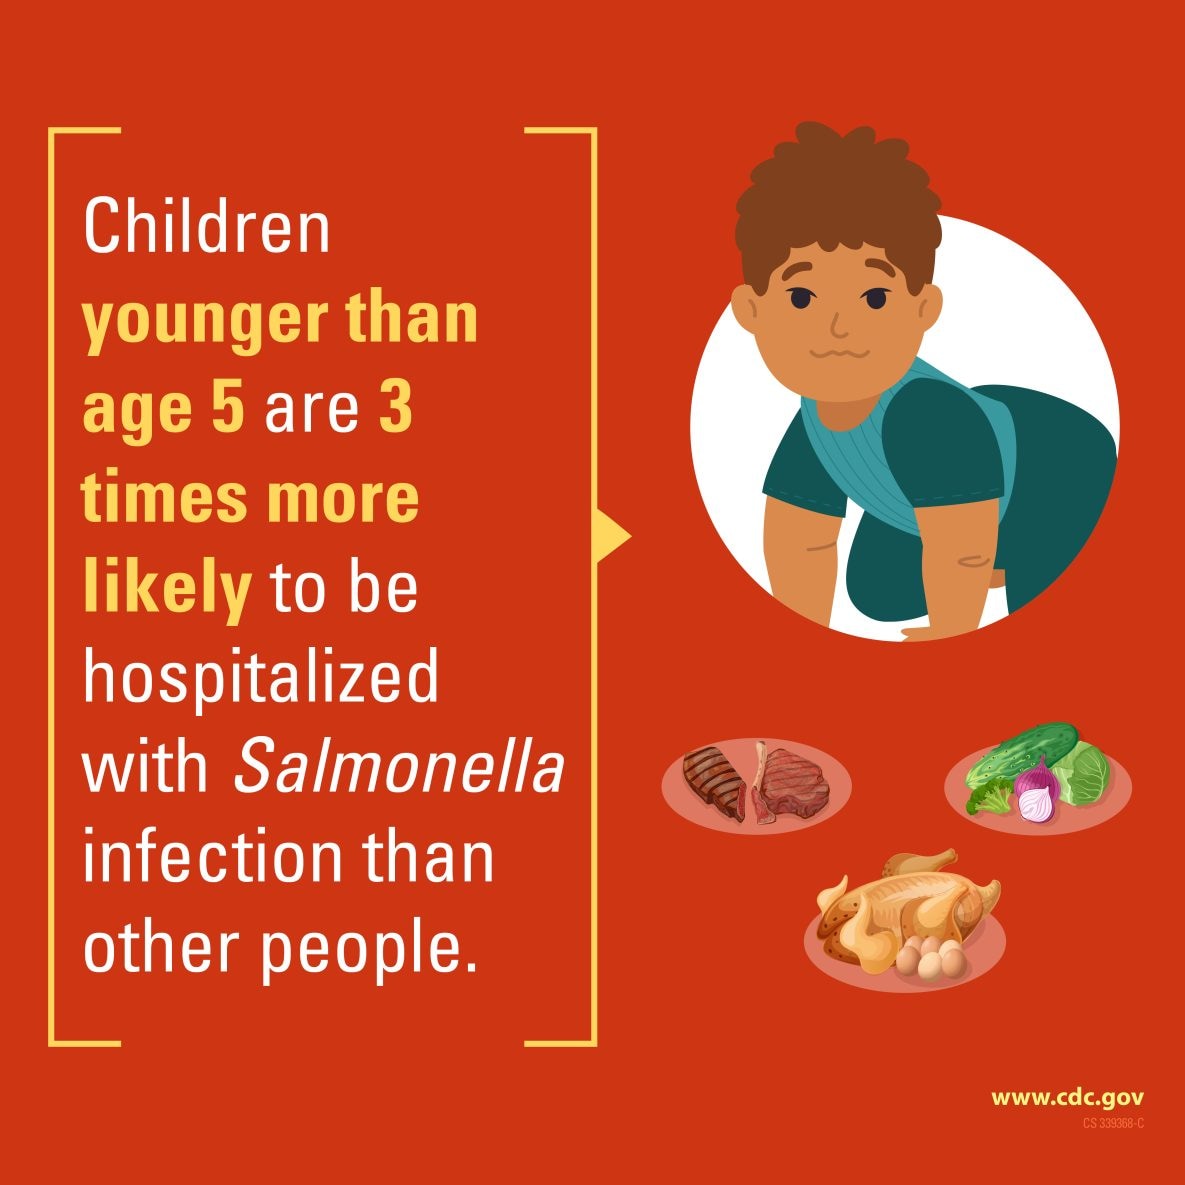 Children younger than age 5 are 3 times more likely to be hospitalized with Salmonella infection than other people.